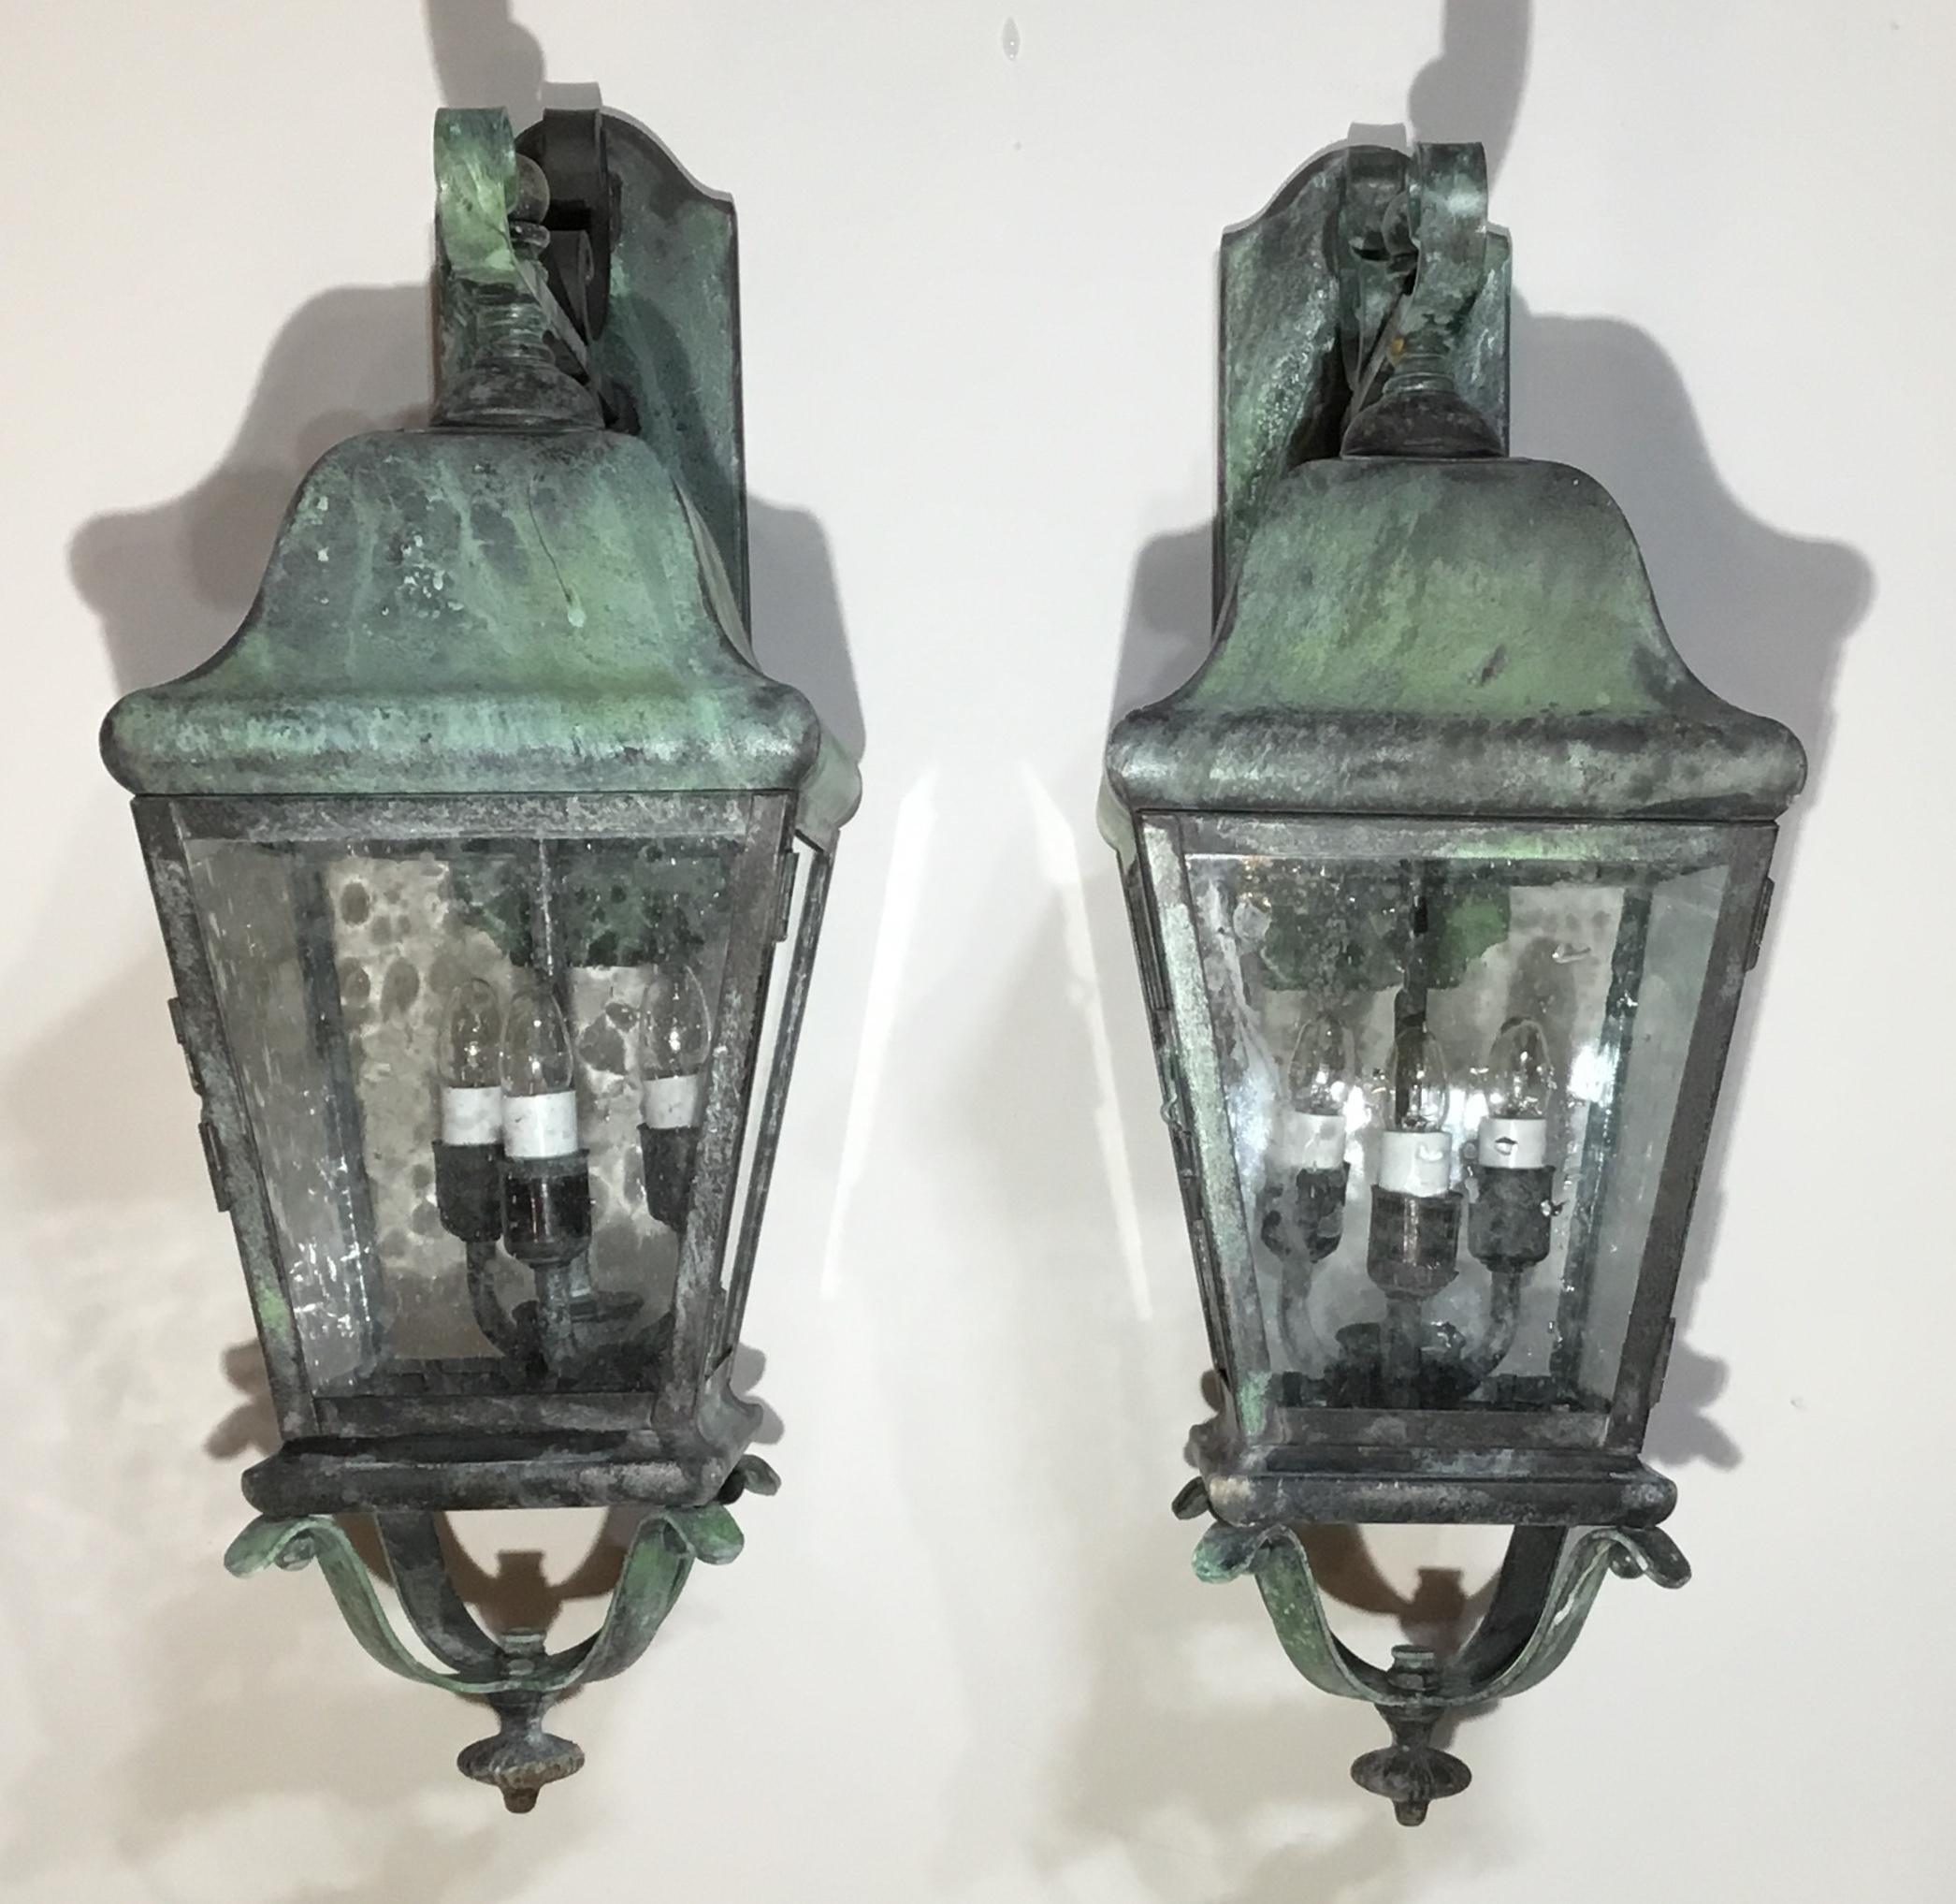 Impressive pair of lantern handcrafted from solid brass, electrified with cluster of three 40/watt lights each, and ready to hang. Seeded glass UL approved up to US code. Suitable for wet locations.
Very impressive for house enterce, or indoors as